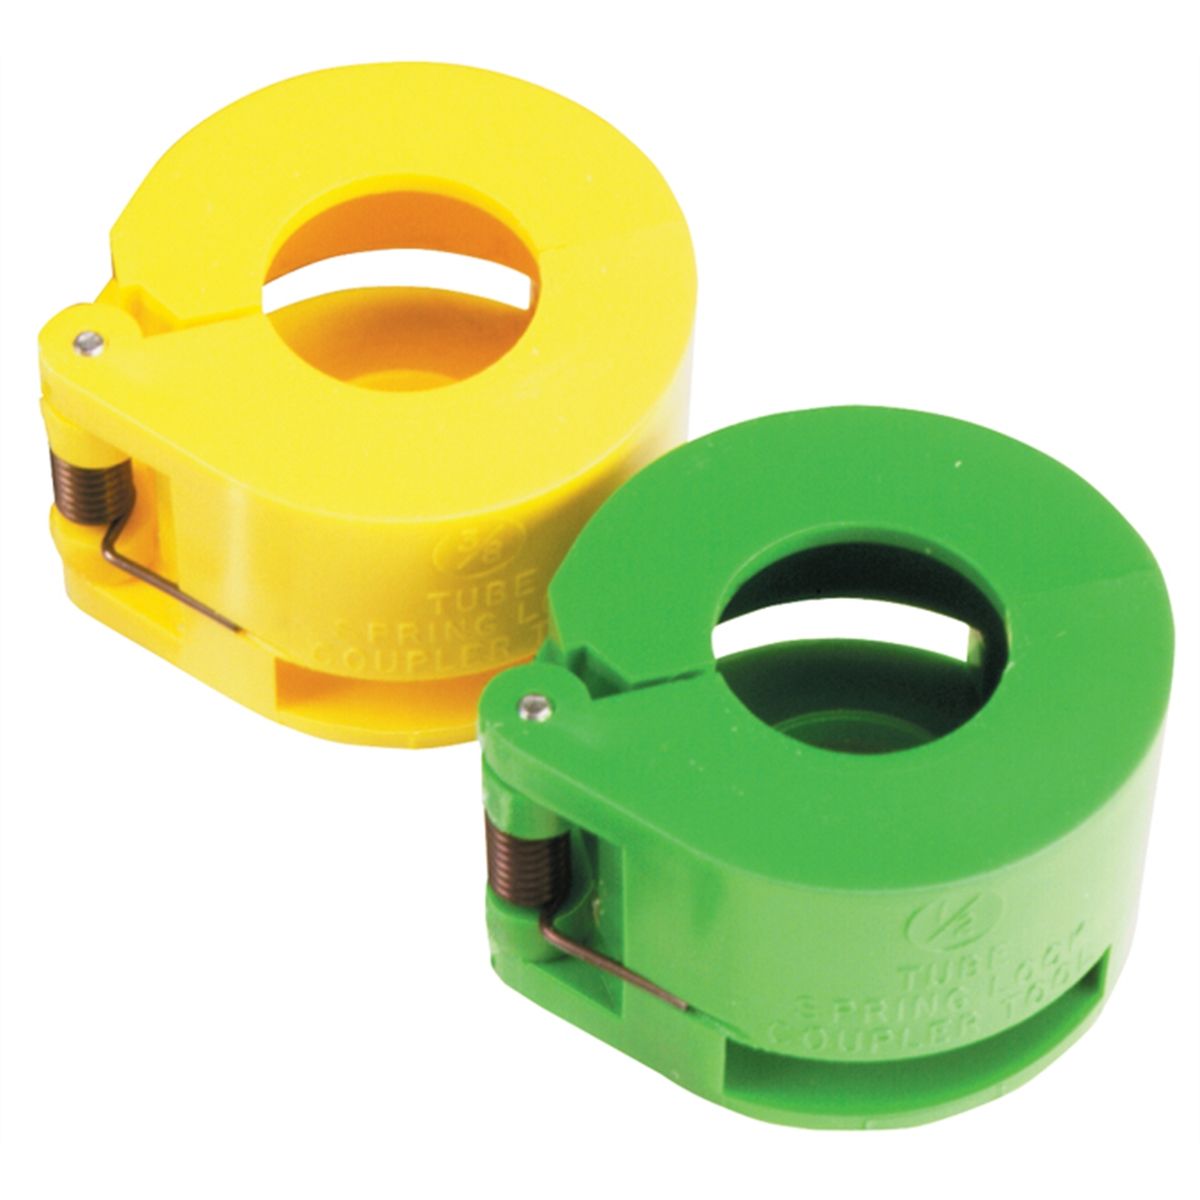 Ford Fuel Line Disconnect Tool Set - Yellow & Green